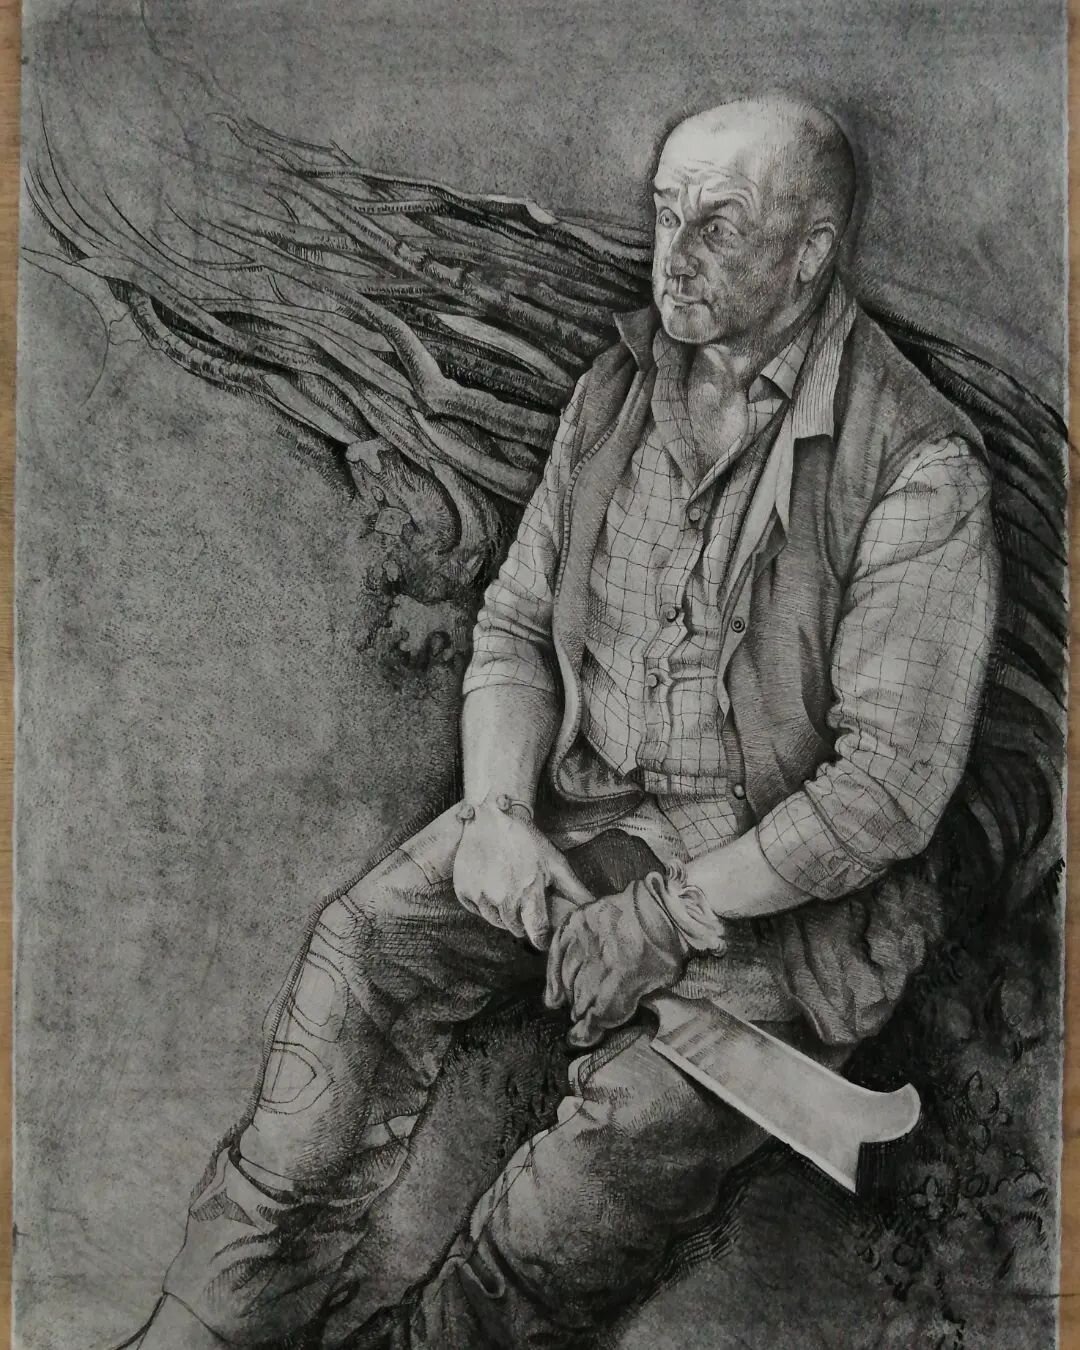 A drawing in charcoal, pencil, pen and ink... Yes that man again!
Russell Woodham aka 'The Dorset Hedgelayer' @thedorsethedgelayer

Ill be showing this at the @royalsocietyportraitpainters annual show alongside pictures in previous posts. 
4th to 13t